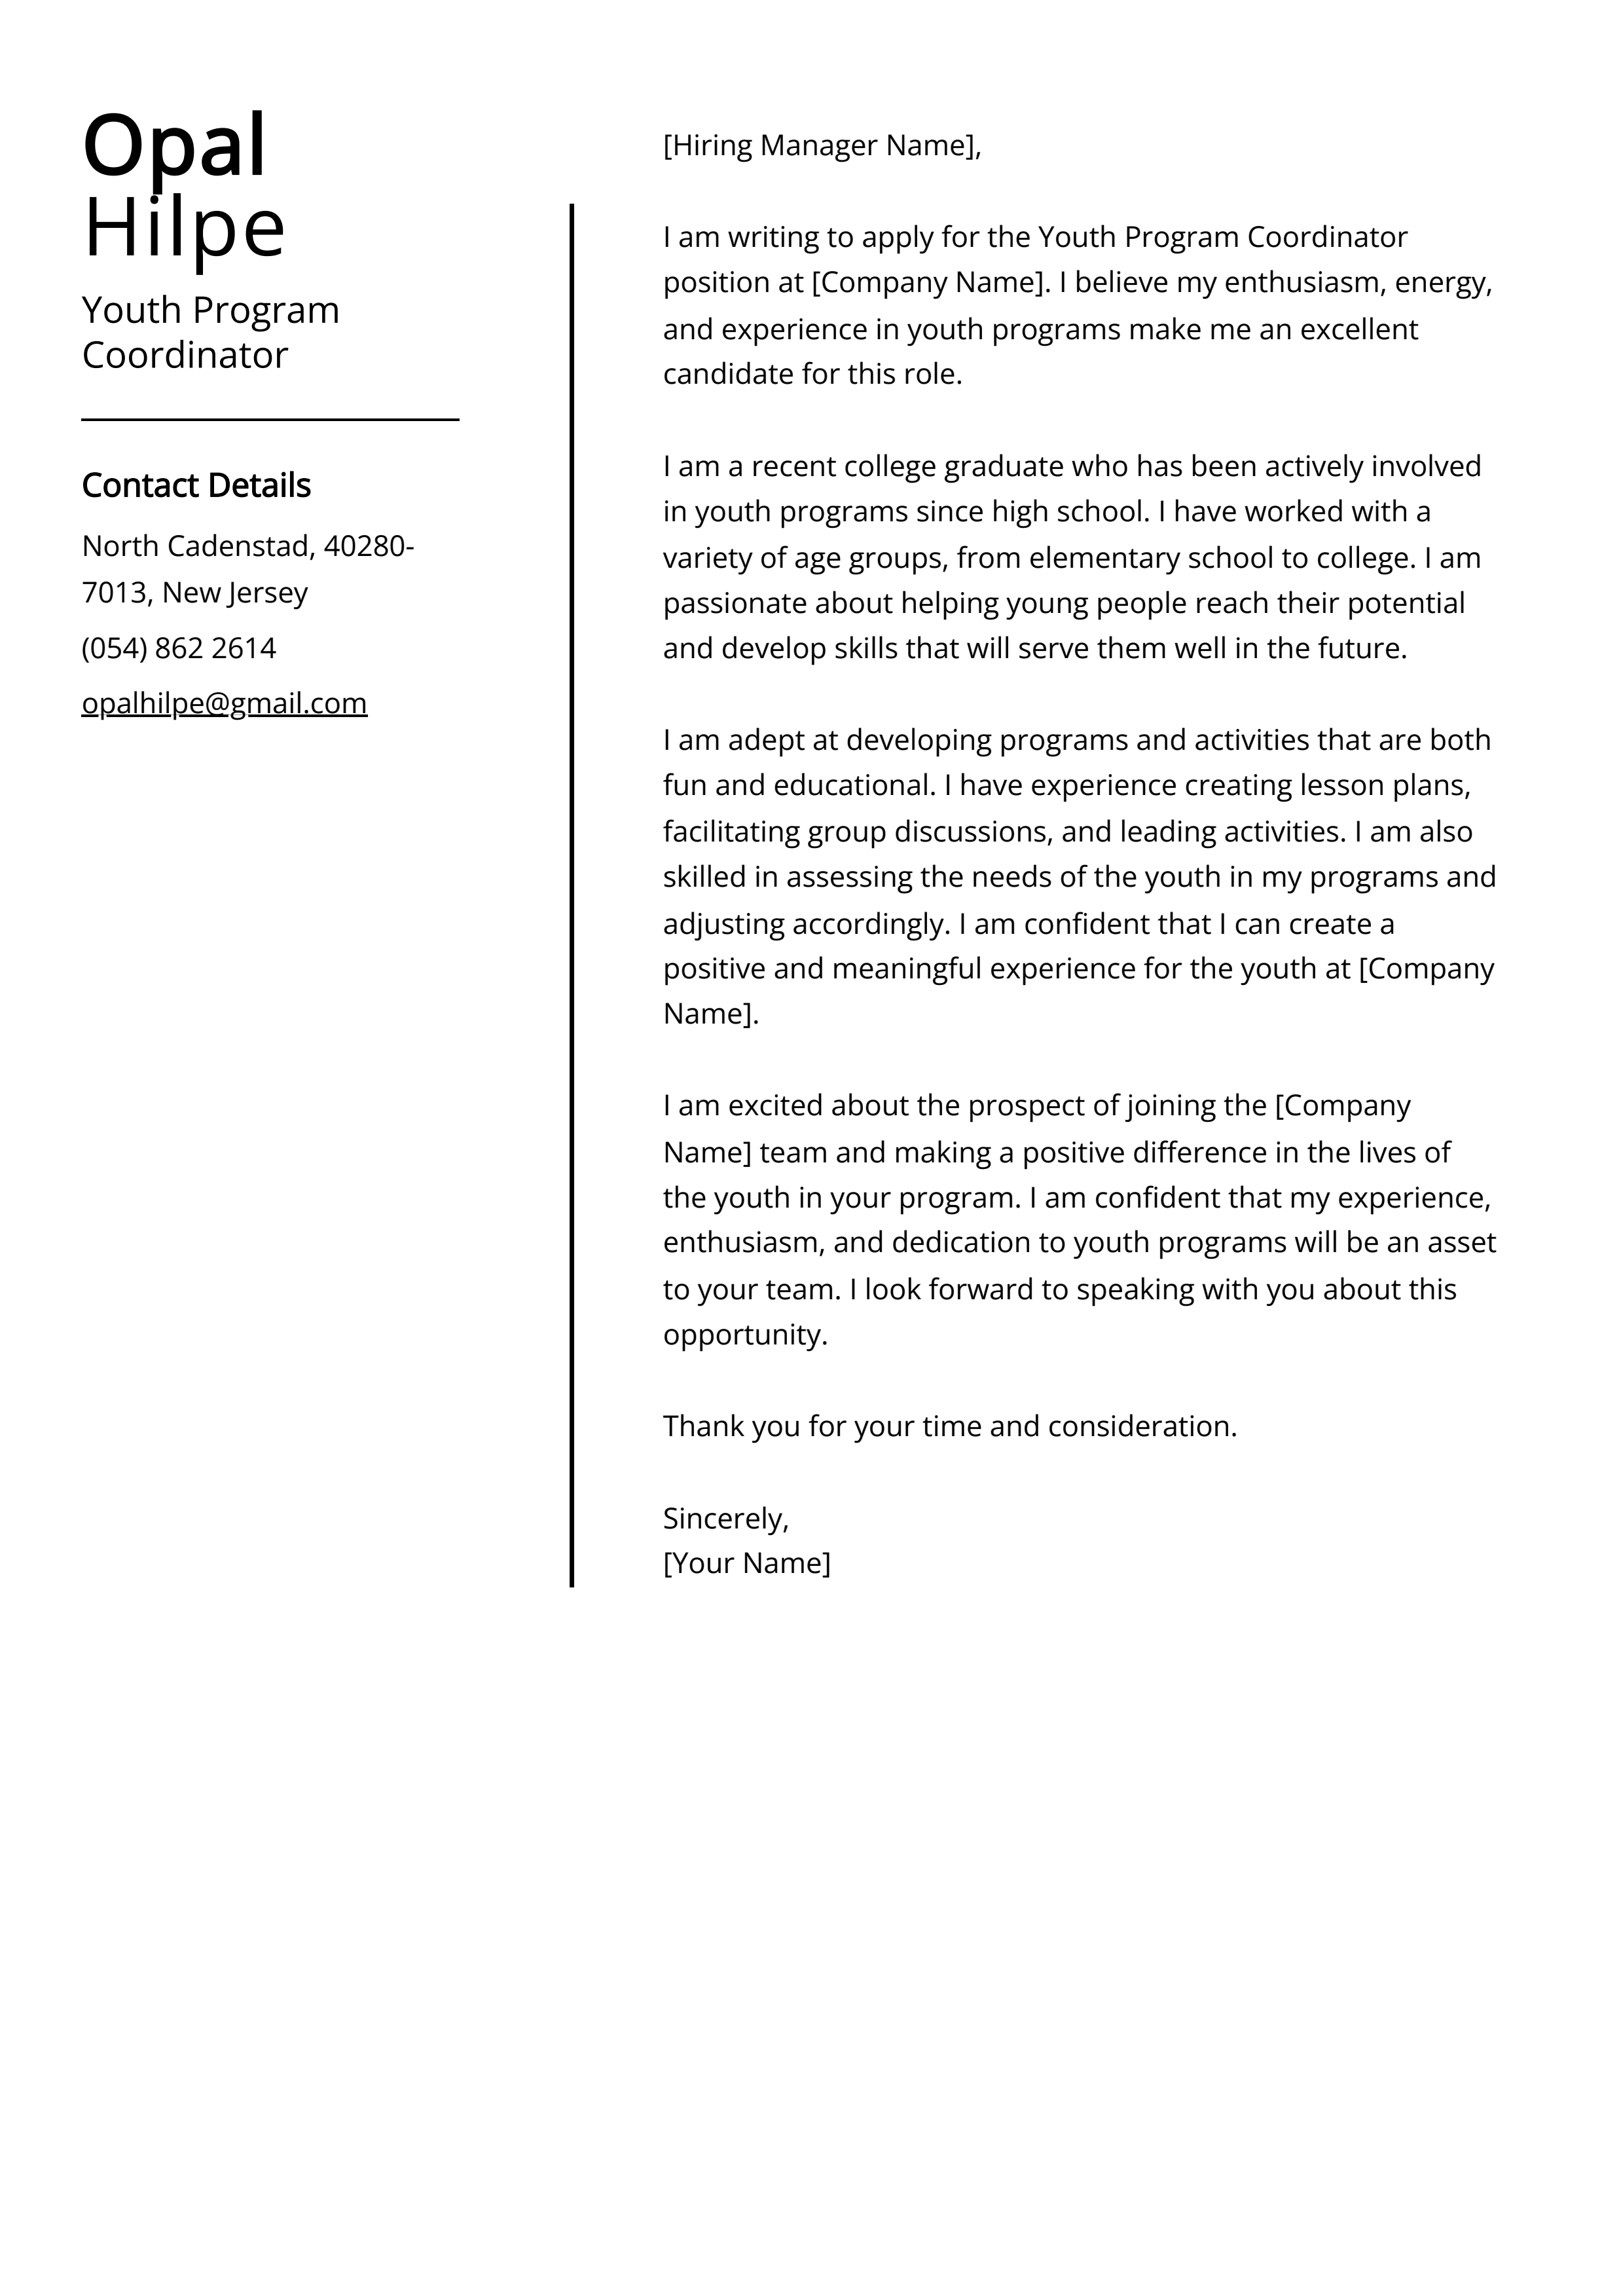 Youth Program Coordinator Cover Letter Example